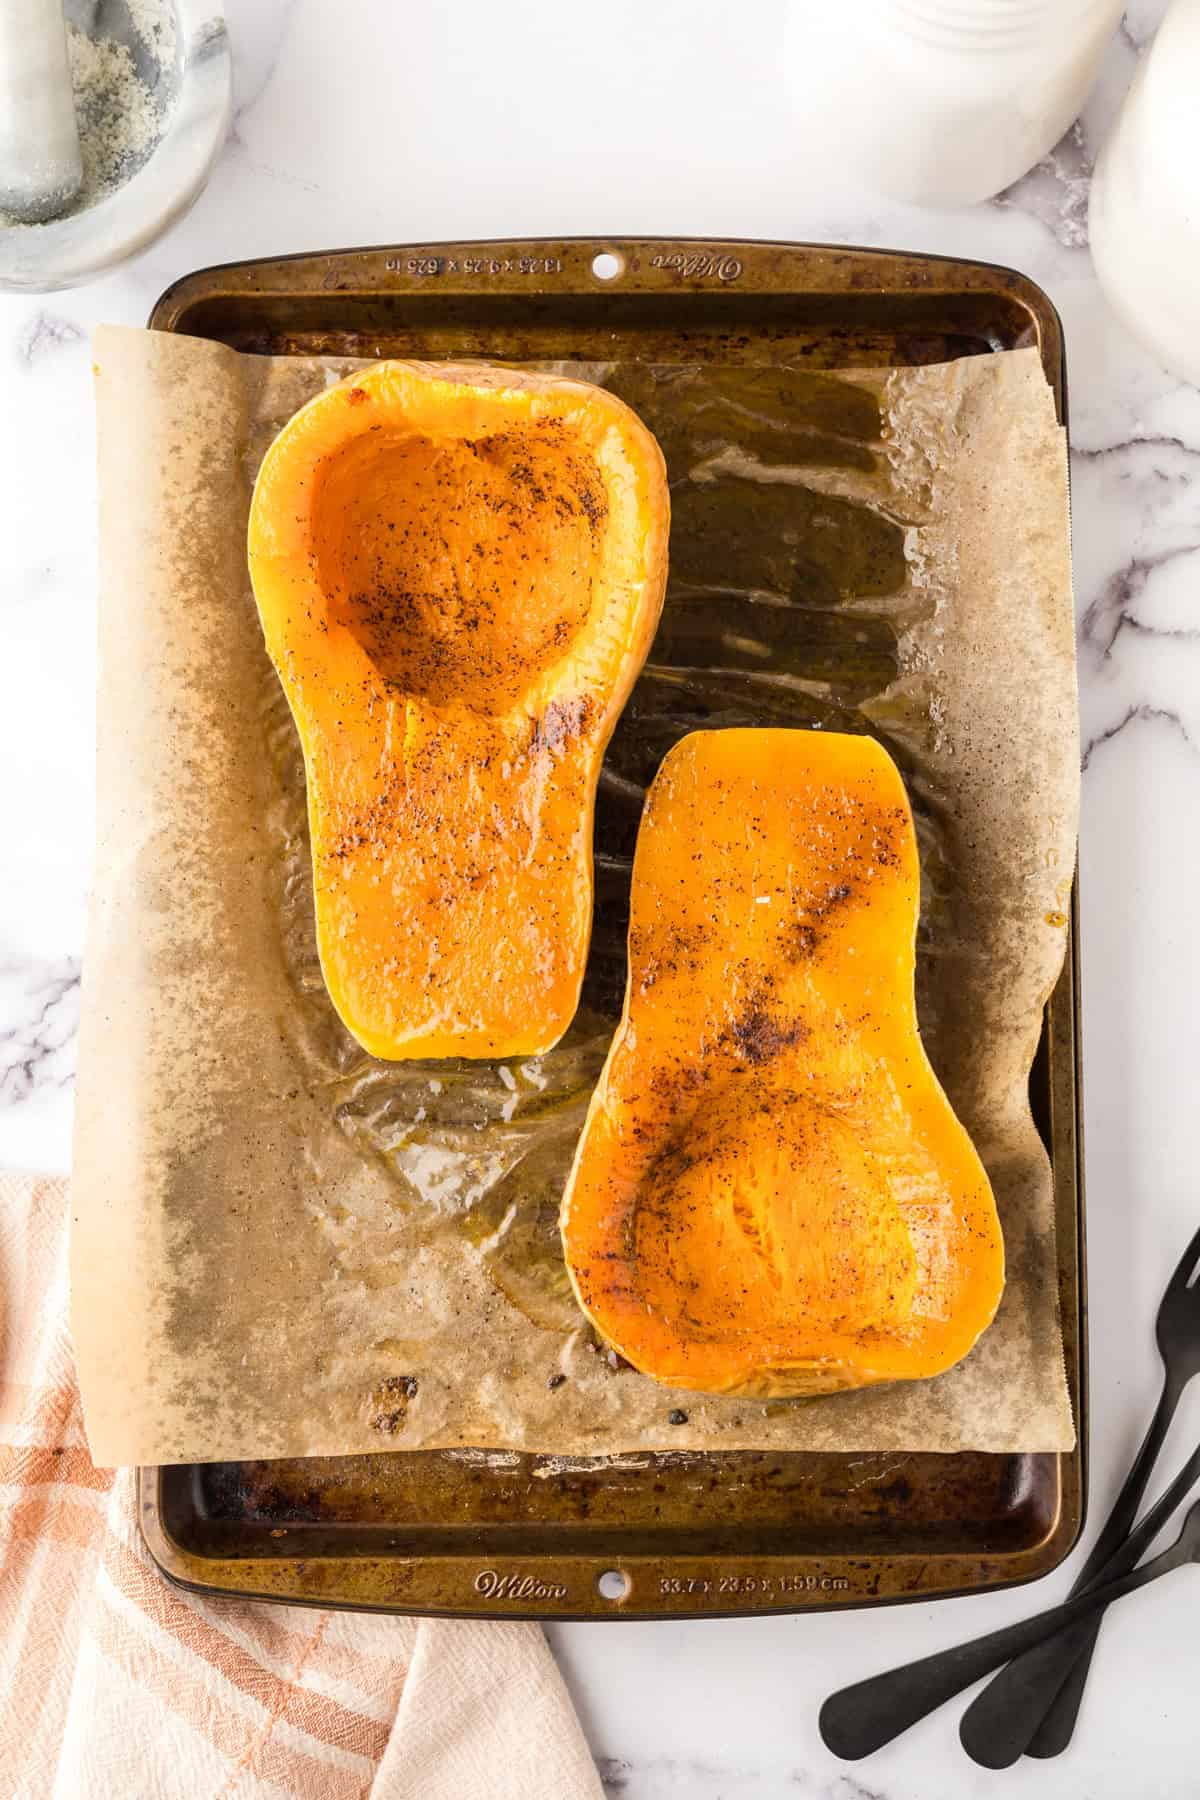 how to bake butternut squash showing the halved squash on parchment over a baking sheet seasoned and baked.